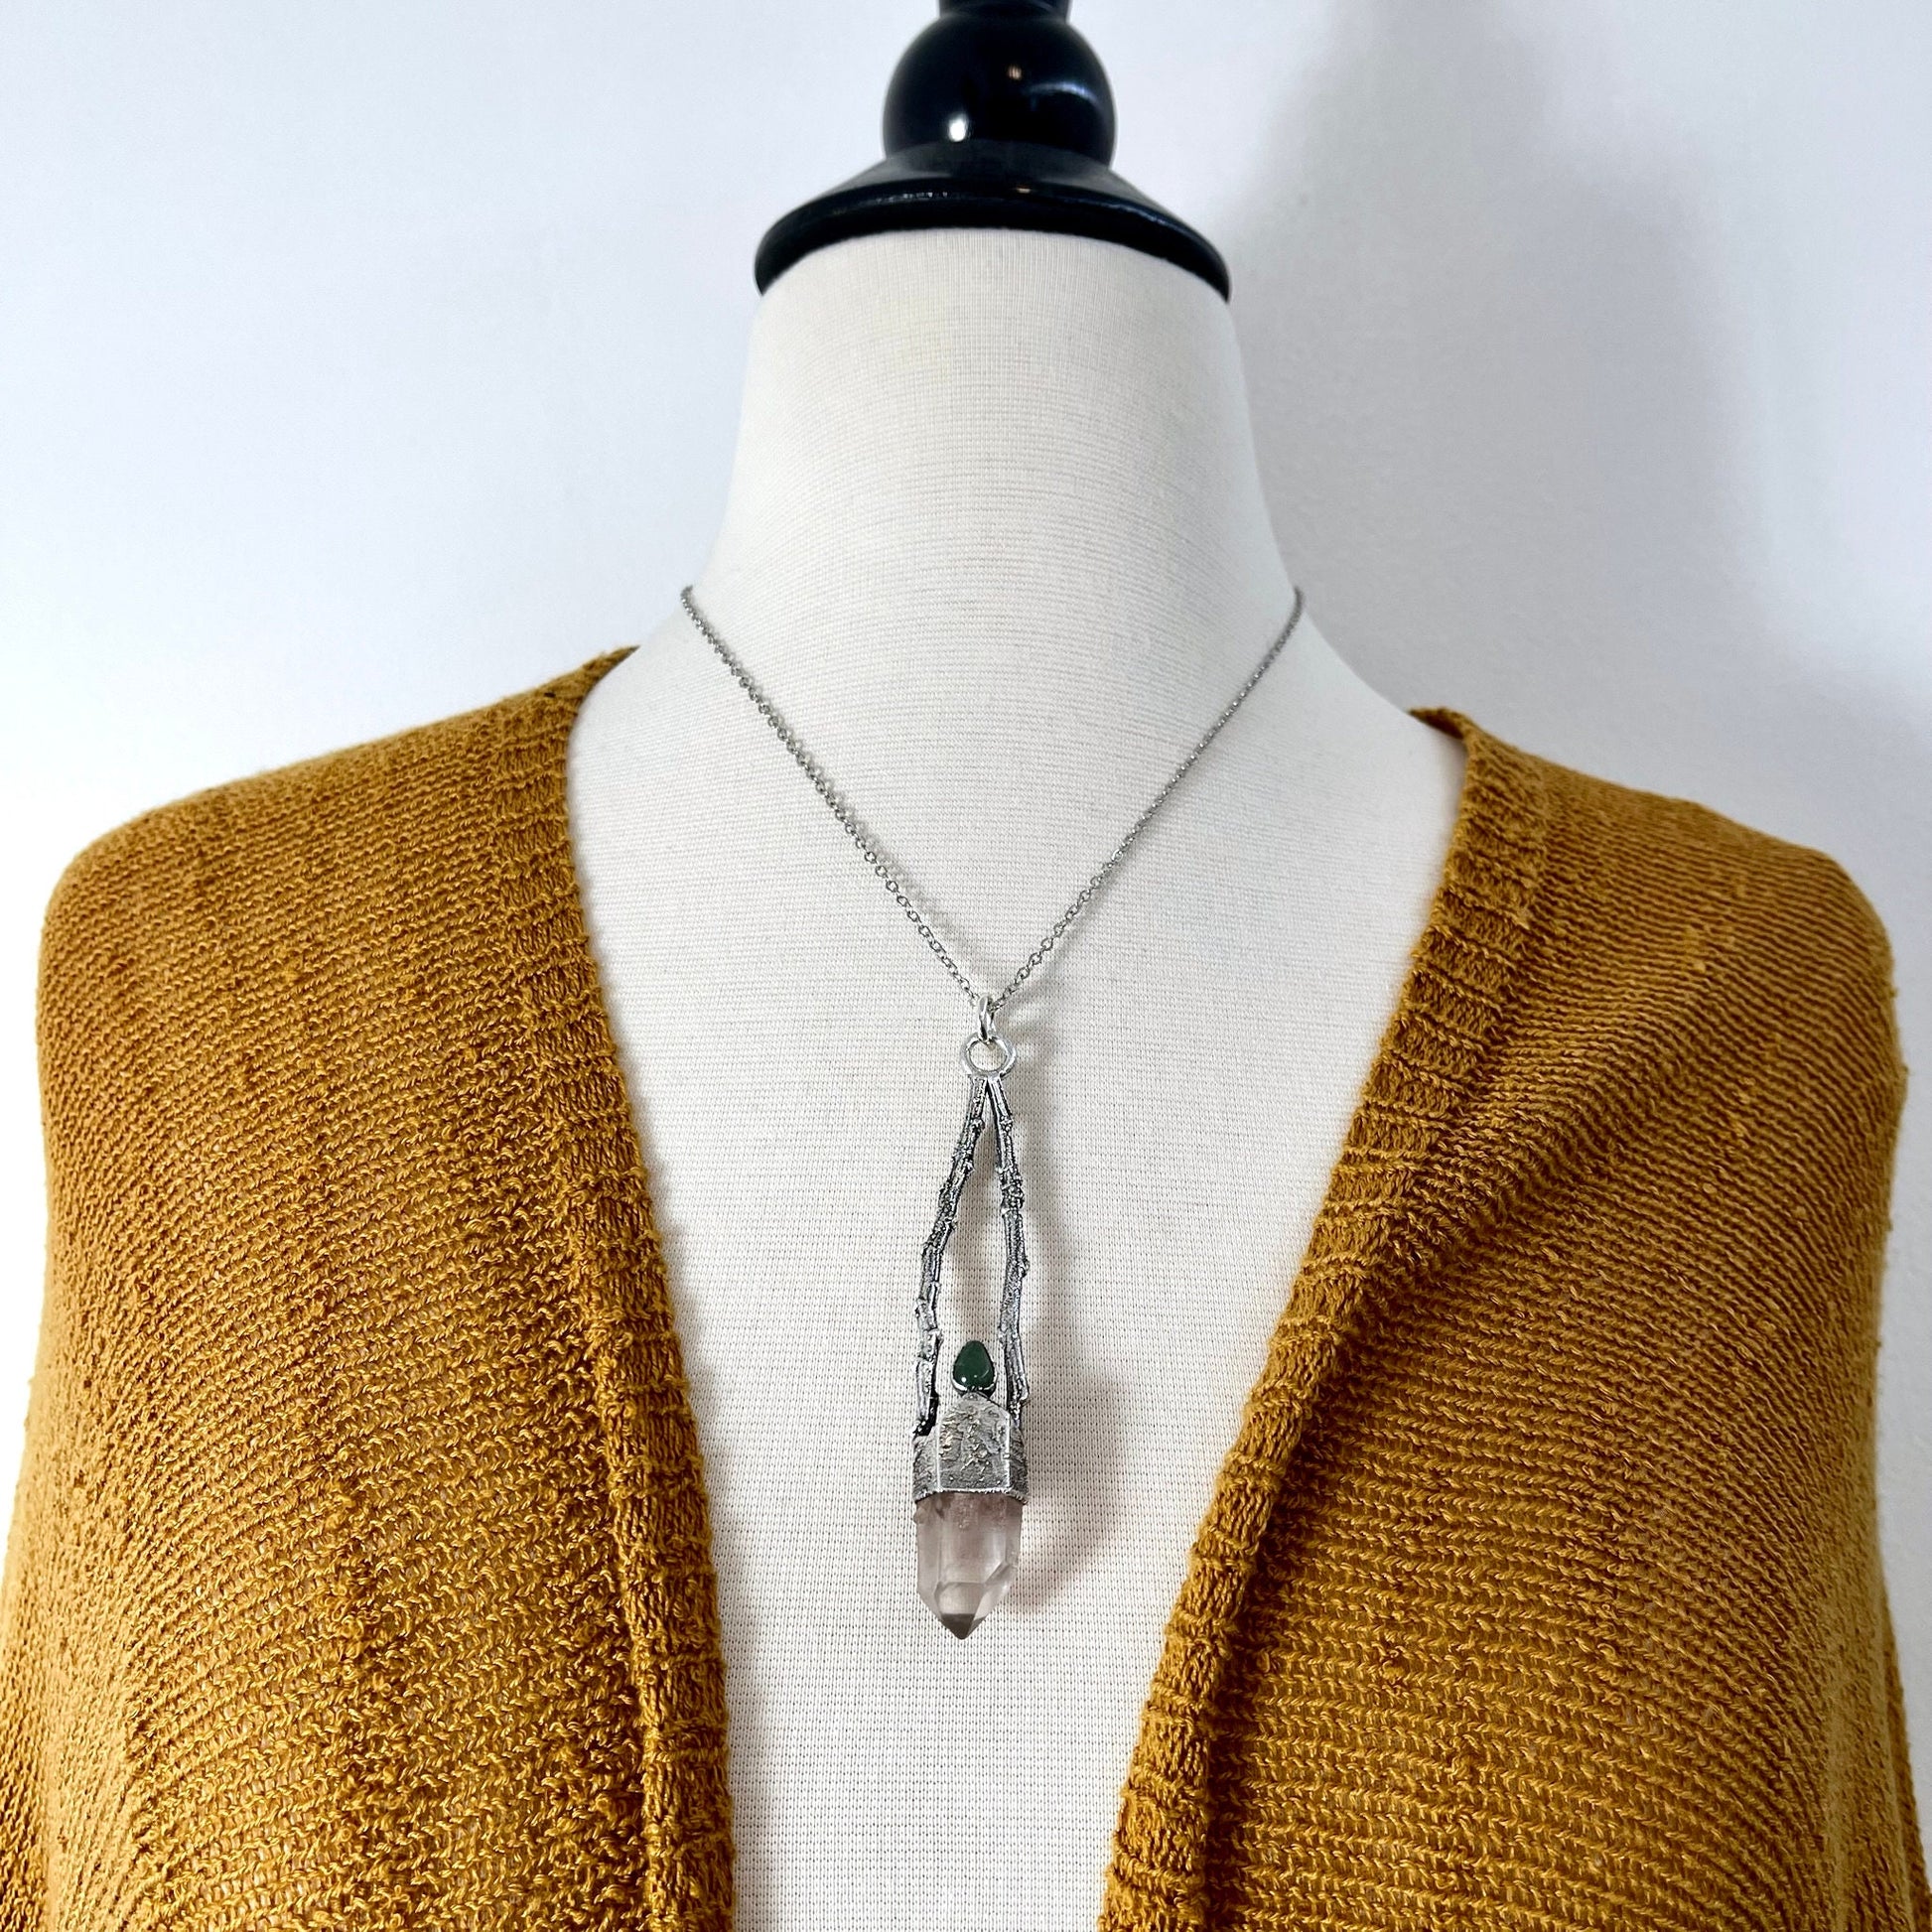 big crystal Necklace, Bohemian Jewelry, Crystal Necklaces, Crystal Pendant, Etsy ID: 1669644277, FOXLARK- NECKLACES, Jewelry, nature inspired, Necklaces, Quartz pendent, Raw Quartz jewelry, Silver Jewelry, Silver Necklace, Silver Stone Jewelry, Statement